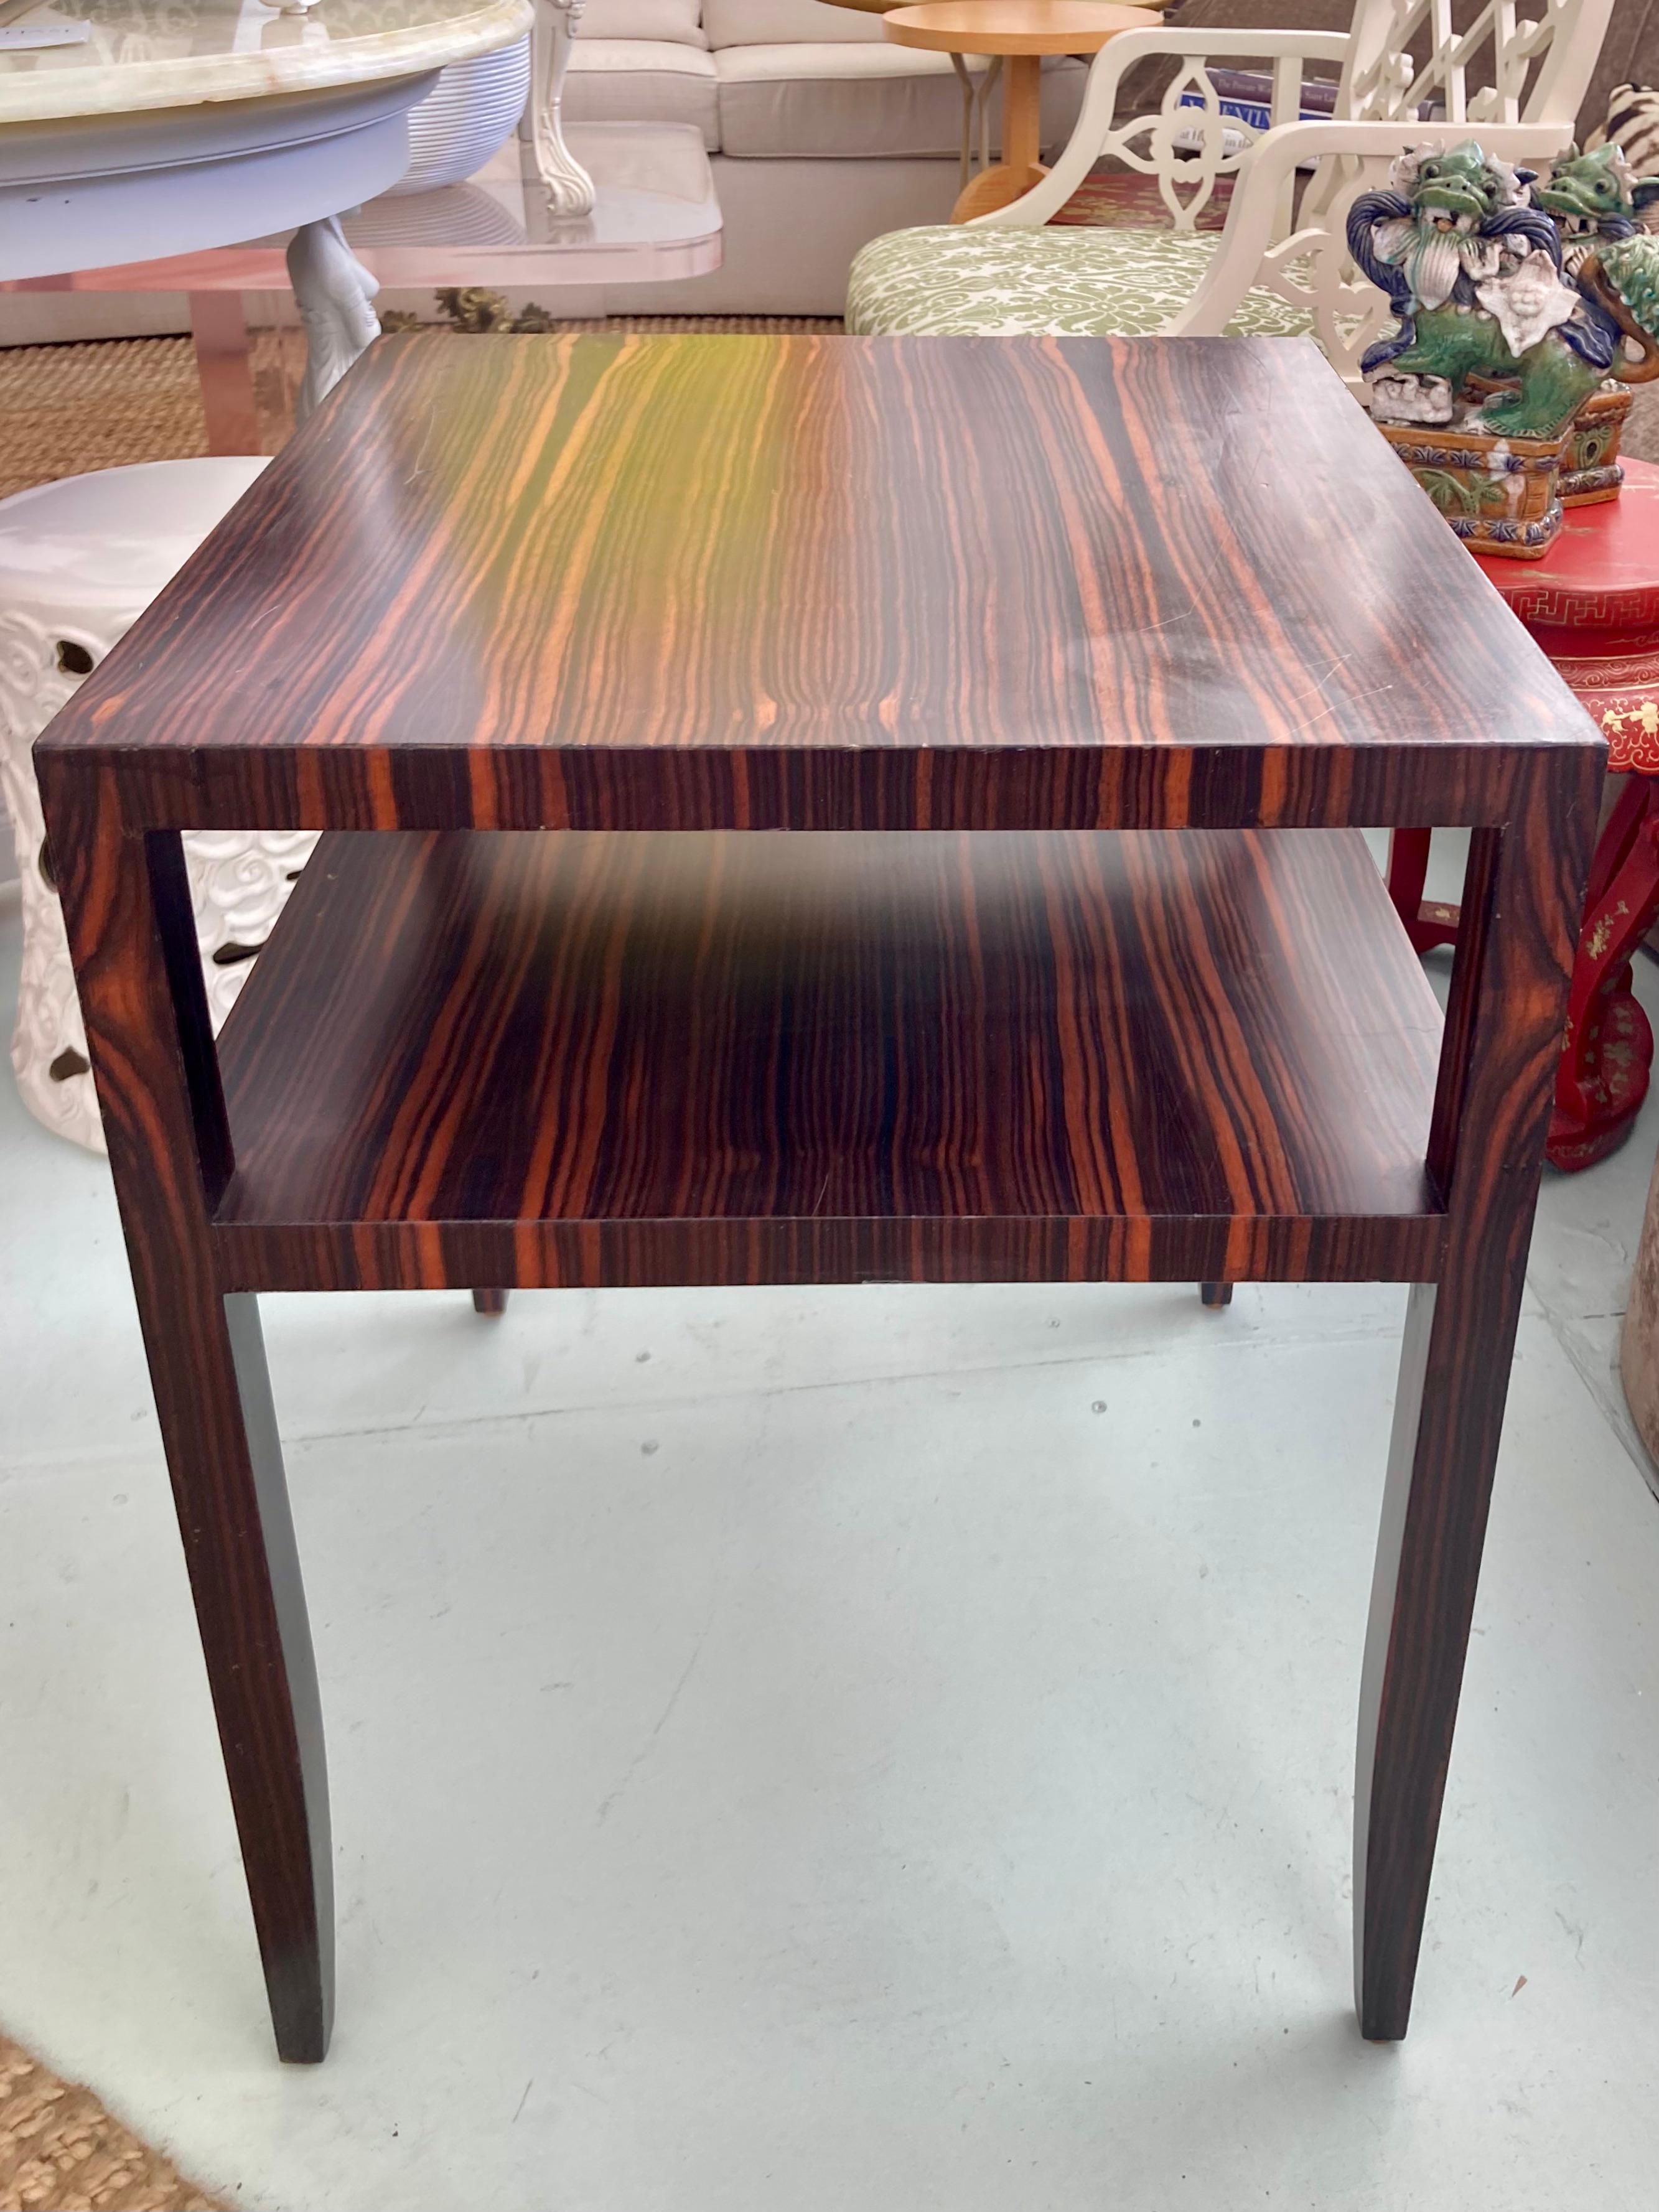 Beautiful Todd Hase Michel Macassar ebony side table. This is an original floor sample, so selling as is. Great addition to your modern interiors.